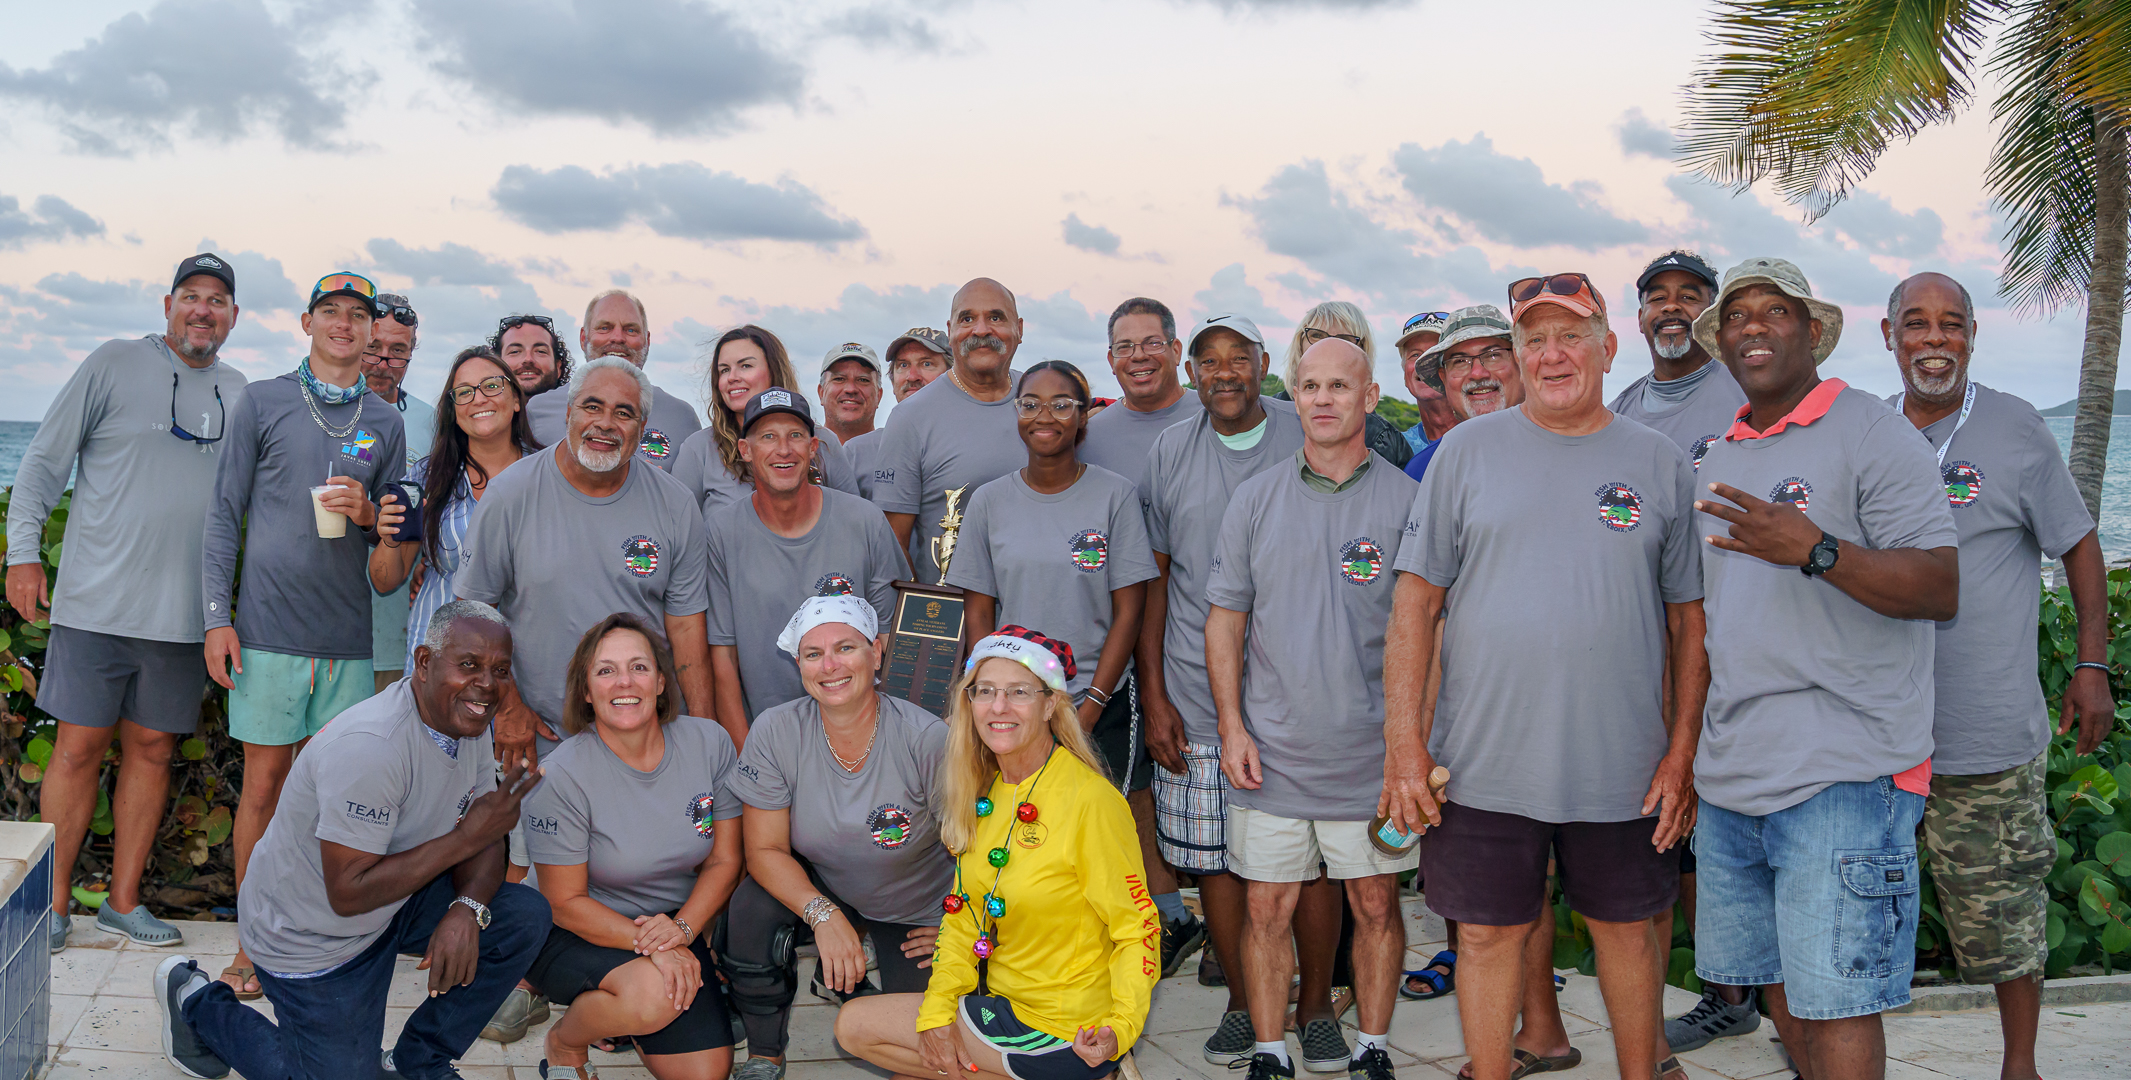 Nine local captains and their deckhands volunteered their time, experience, fishing gear, and fuel so 28 veterans could enjoy the Fish With A Vet Tournament on Saturday on St. Croix. (Photo by Chéri@freespirit)